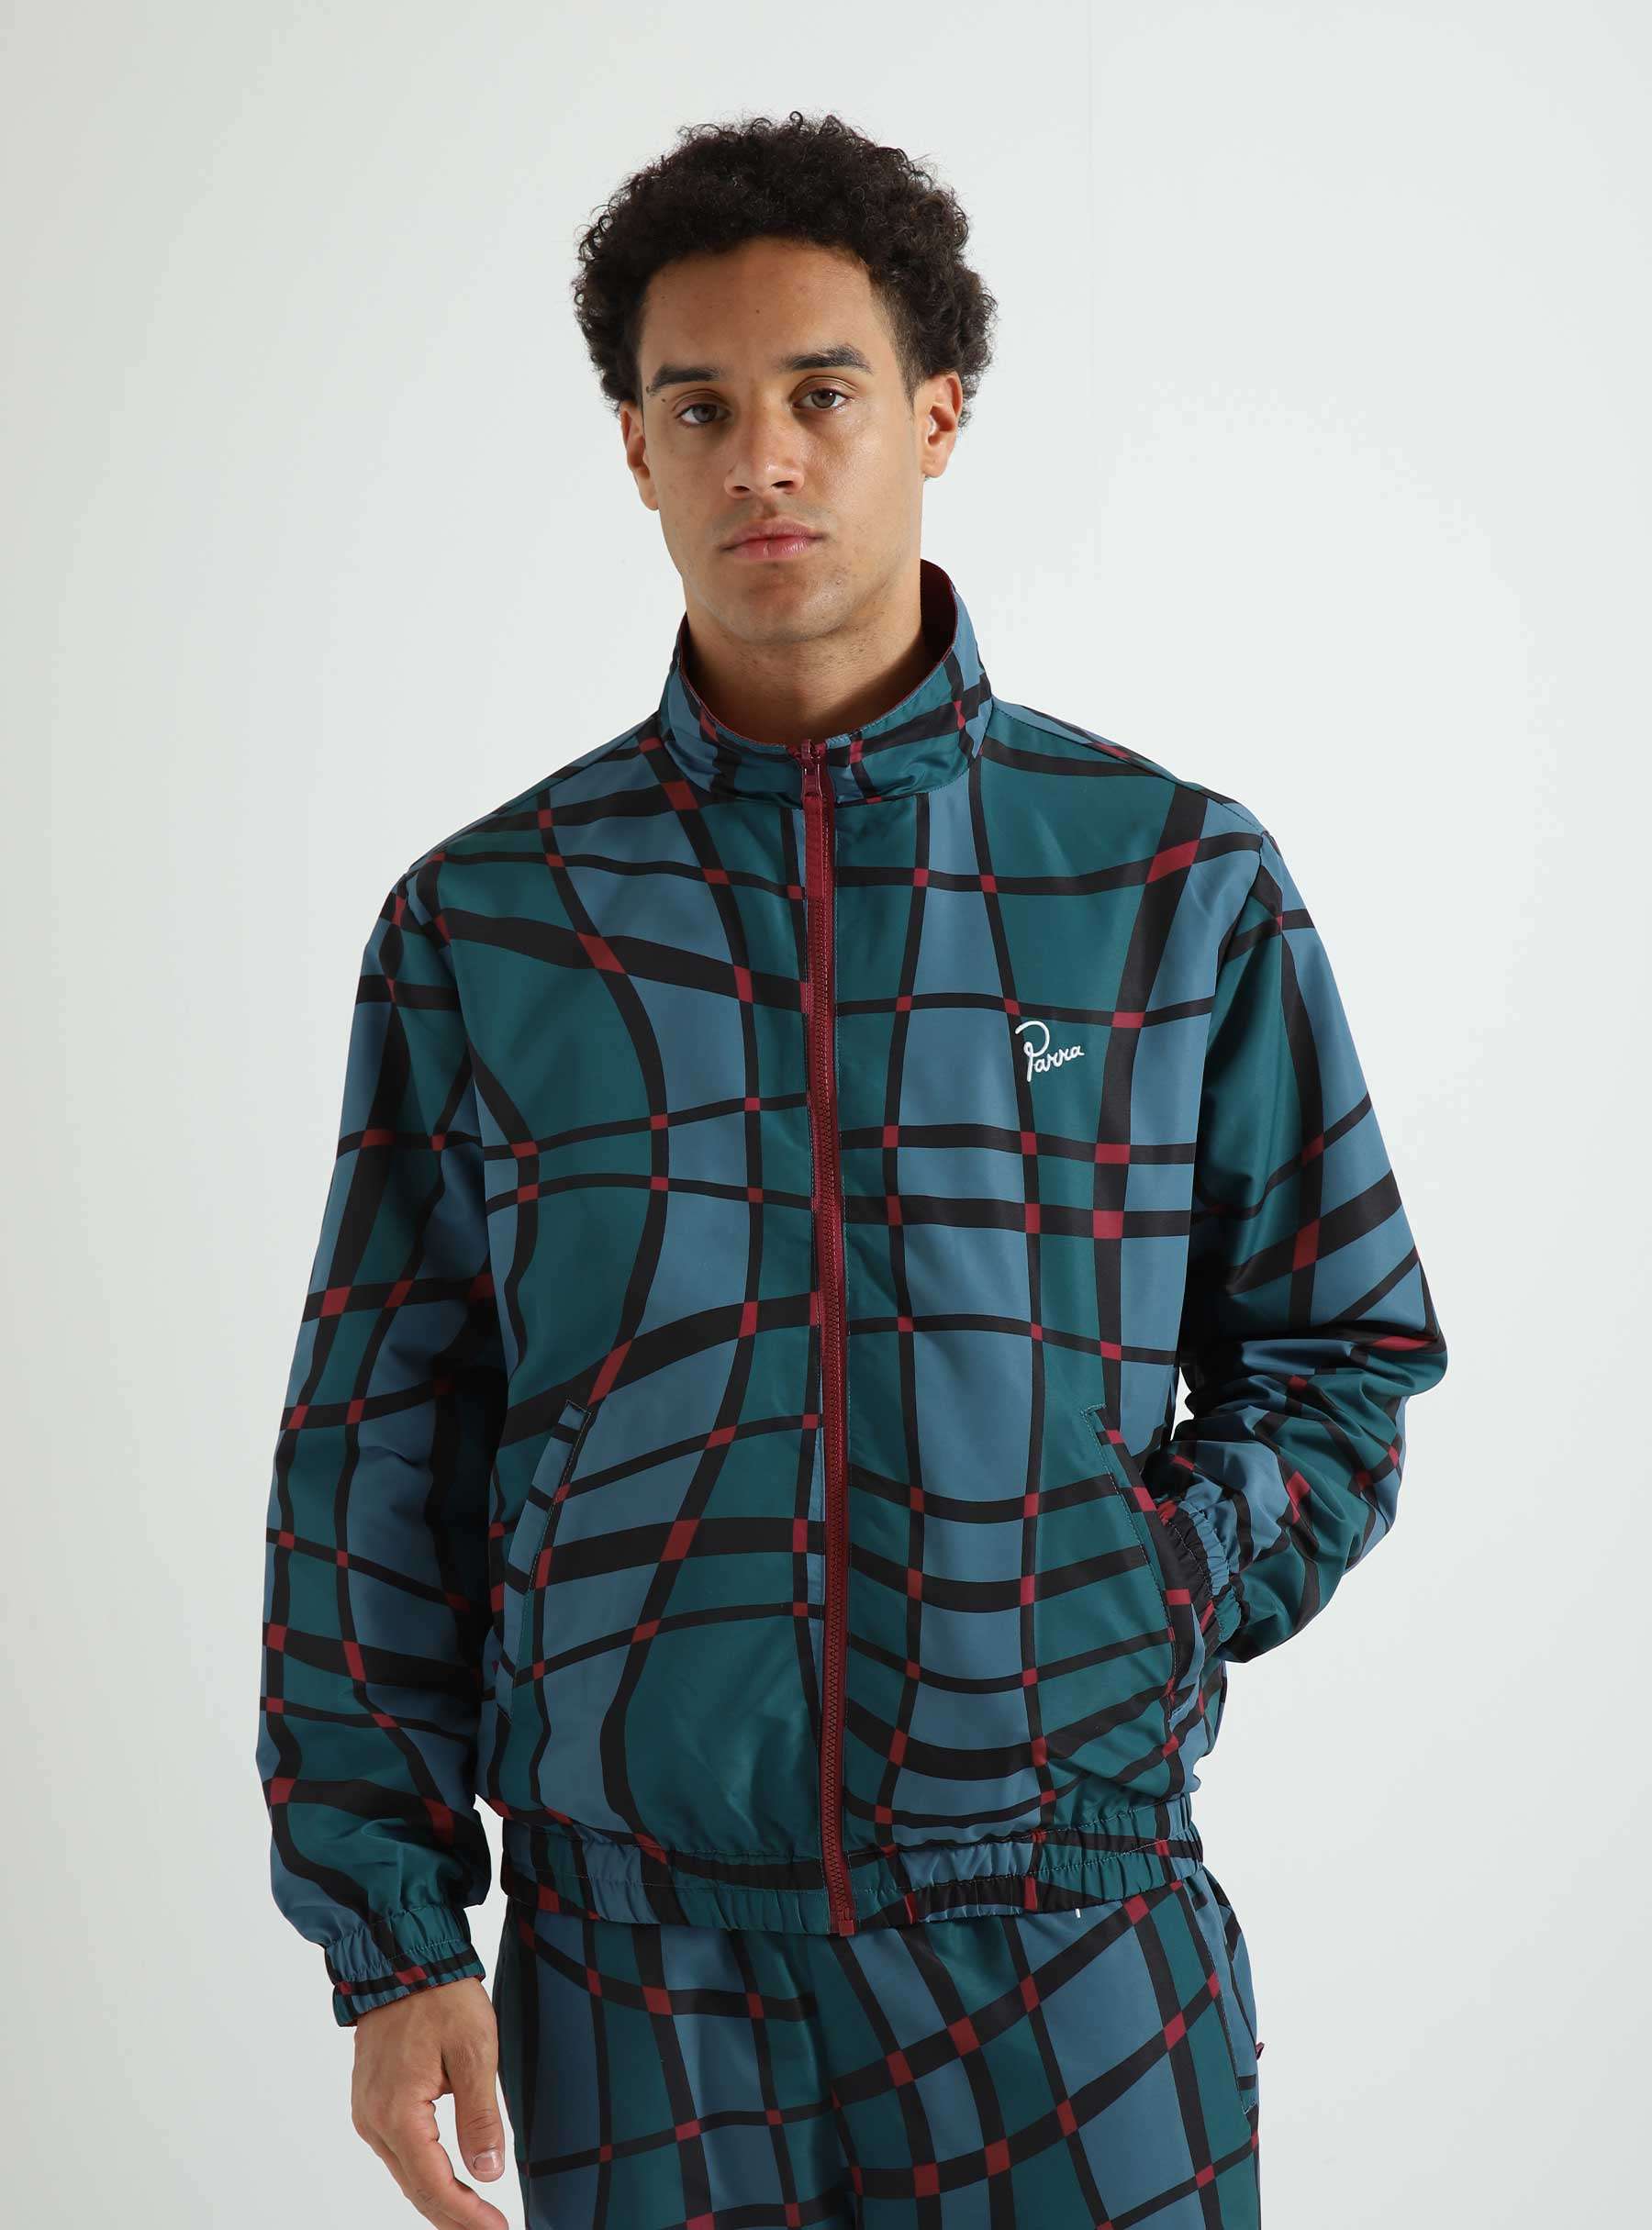 Squared Waves Pattern Track Top Multi Check 49320